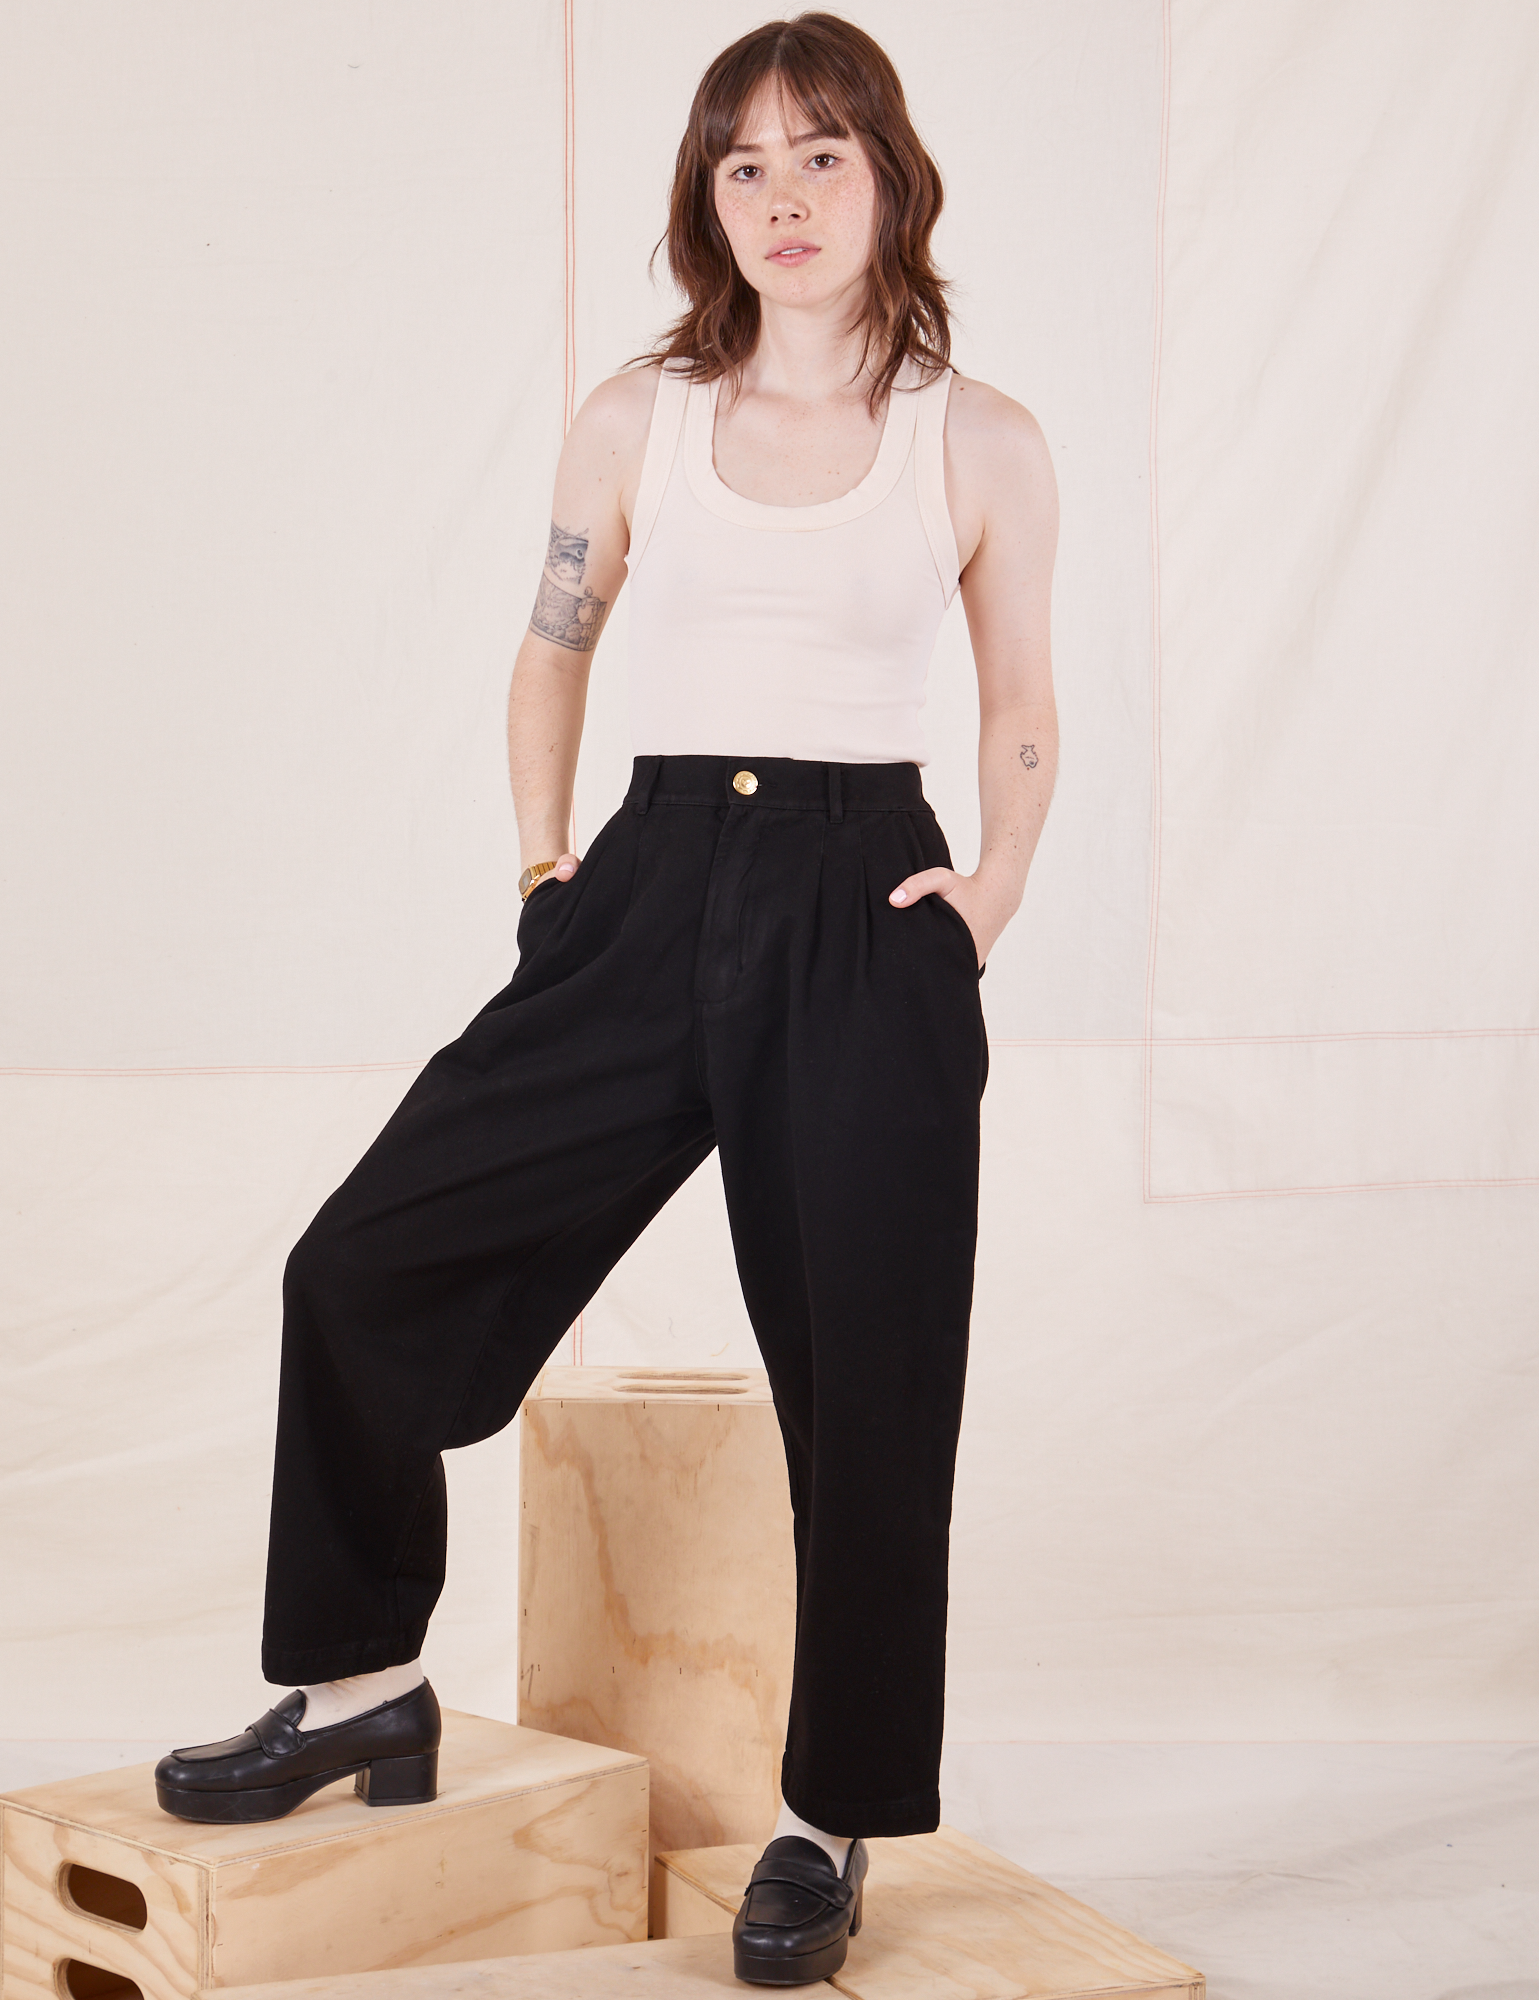 Hana is 5&#39;3&quot; and wearing XXS Petite Organic Trousers in Basic Black paired with vintage off-white Tank Top